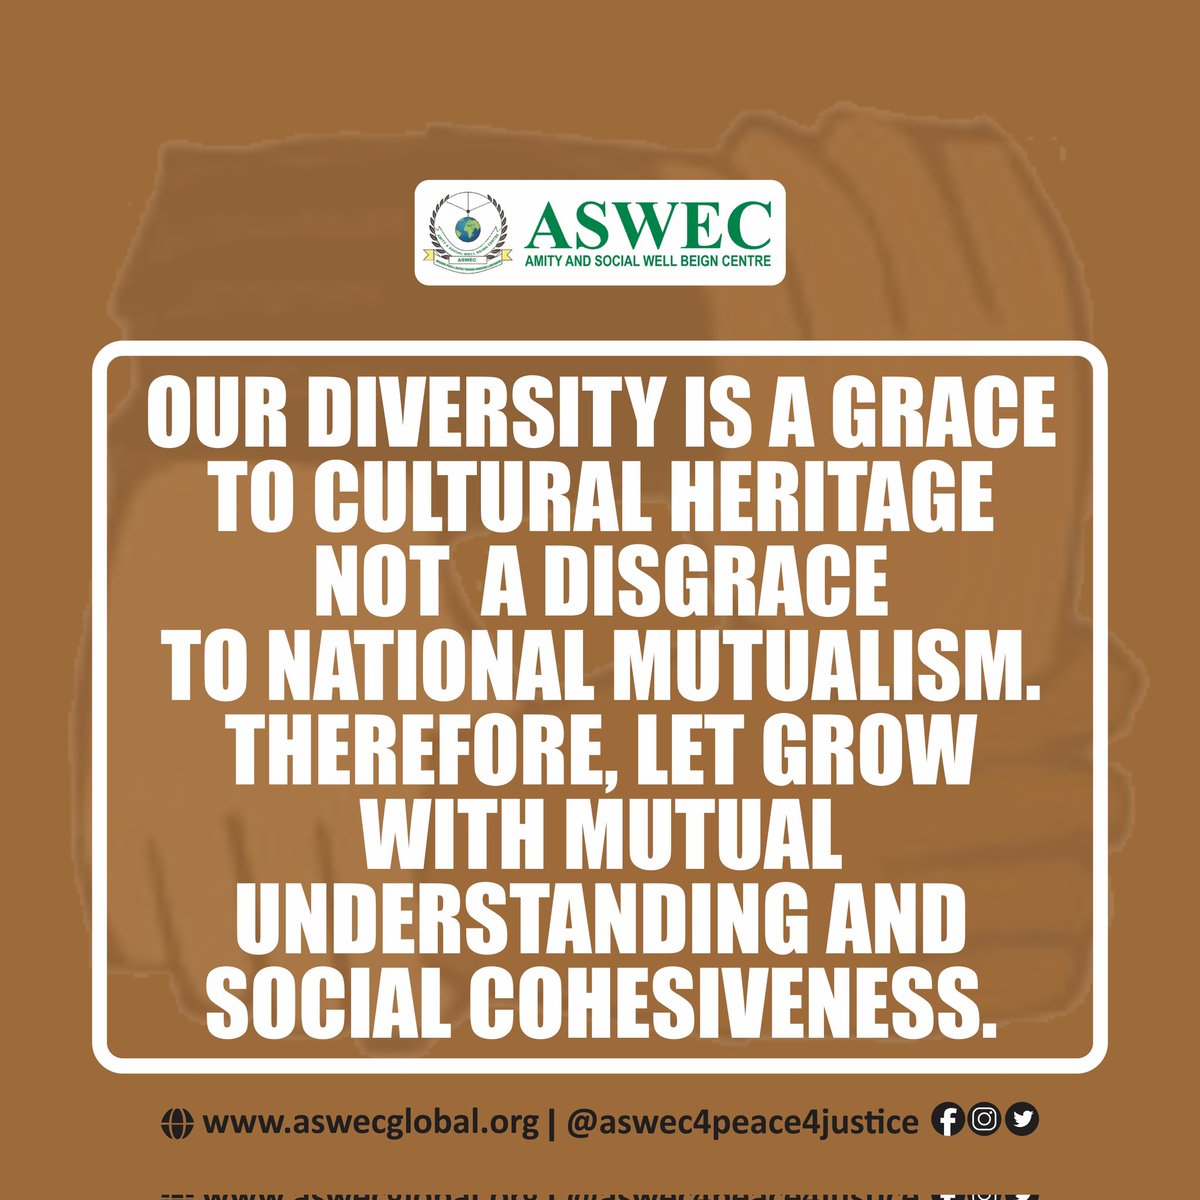 Our Diversity Is A Grace To Cultural  Heritage Not A Disgrace To National Mutualism.....

#peaceindiversity 
#UnityInDiversity 
#UnityInTheCommunity 
#unityincommunity 
#culturaldiversity 
#CulturalExploration 
#culturaleducation 
#DiversityAndInclusion 
#UnitedNations